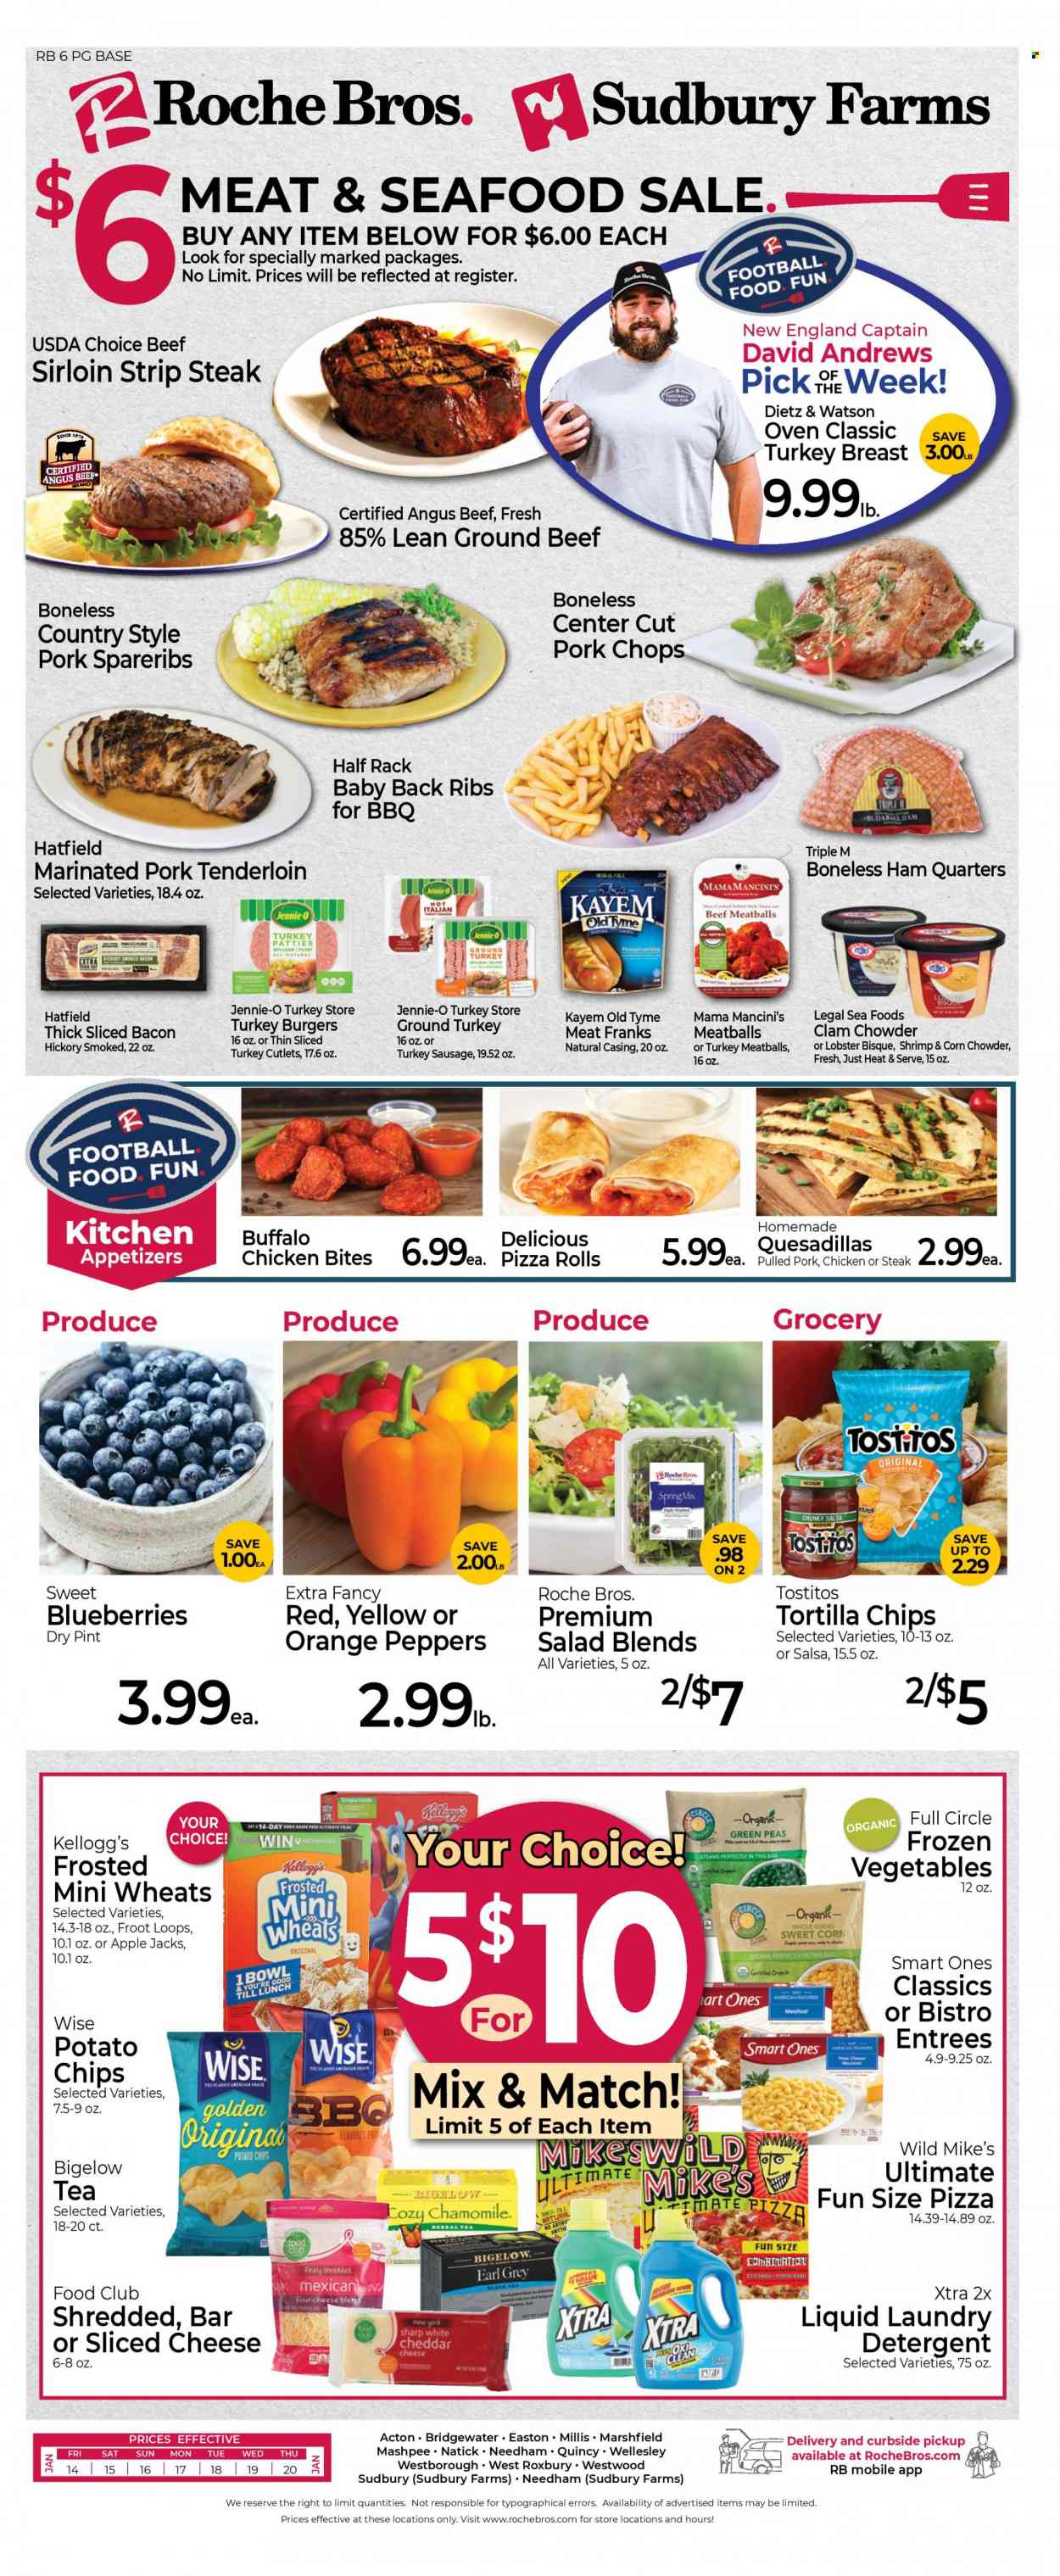 thumbnail - Roche Bros. Flyer - 01/14/2022 - 01/20/2022 - Sales products - pizza rolls, peas, salad, peppers, sweet corn, blueberries, oranges, lobster, seafood, shrimps, pizza, meatballs, hamburger, meatloaf, pulled pork, bacon, sliced turkey, ham, Dietz & Watson, sausage, sliced cheese, chicken bites, Kellogg's, tortilla chips, potato chips, Tostitos, clam chowder, salsa, tea, herbal tea, ground turkey, beef meat, beef sirloin, ground beef, steak, striploin steak, turkey burger, pork chops, pork meat, pork ribs, pork tenderloin, pork spare ribs, pork back ribs, marinated pork, detergent, laundry detergent, XTRA, bag, pot. Page 1.